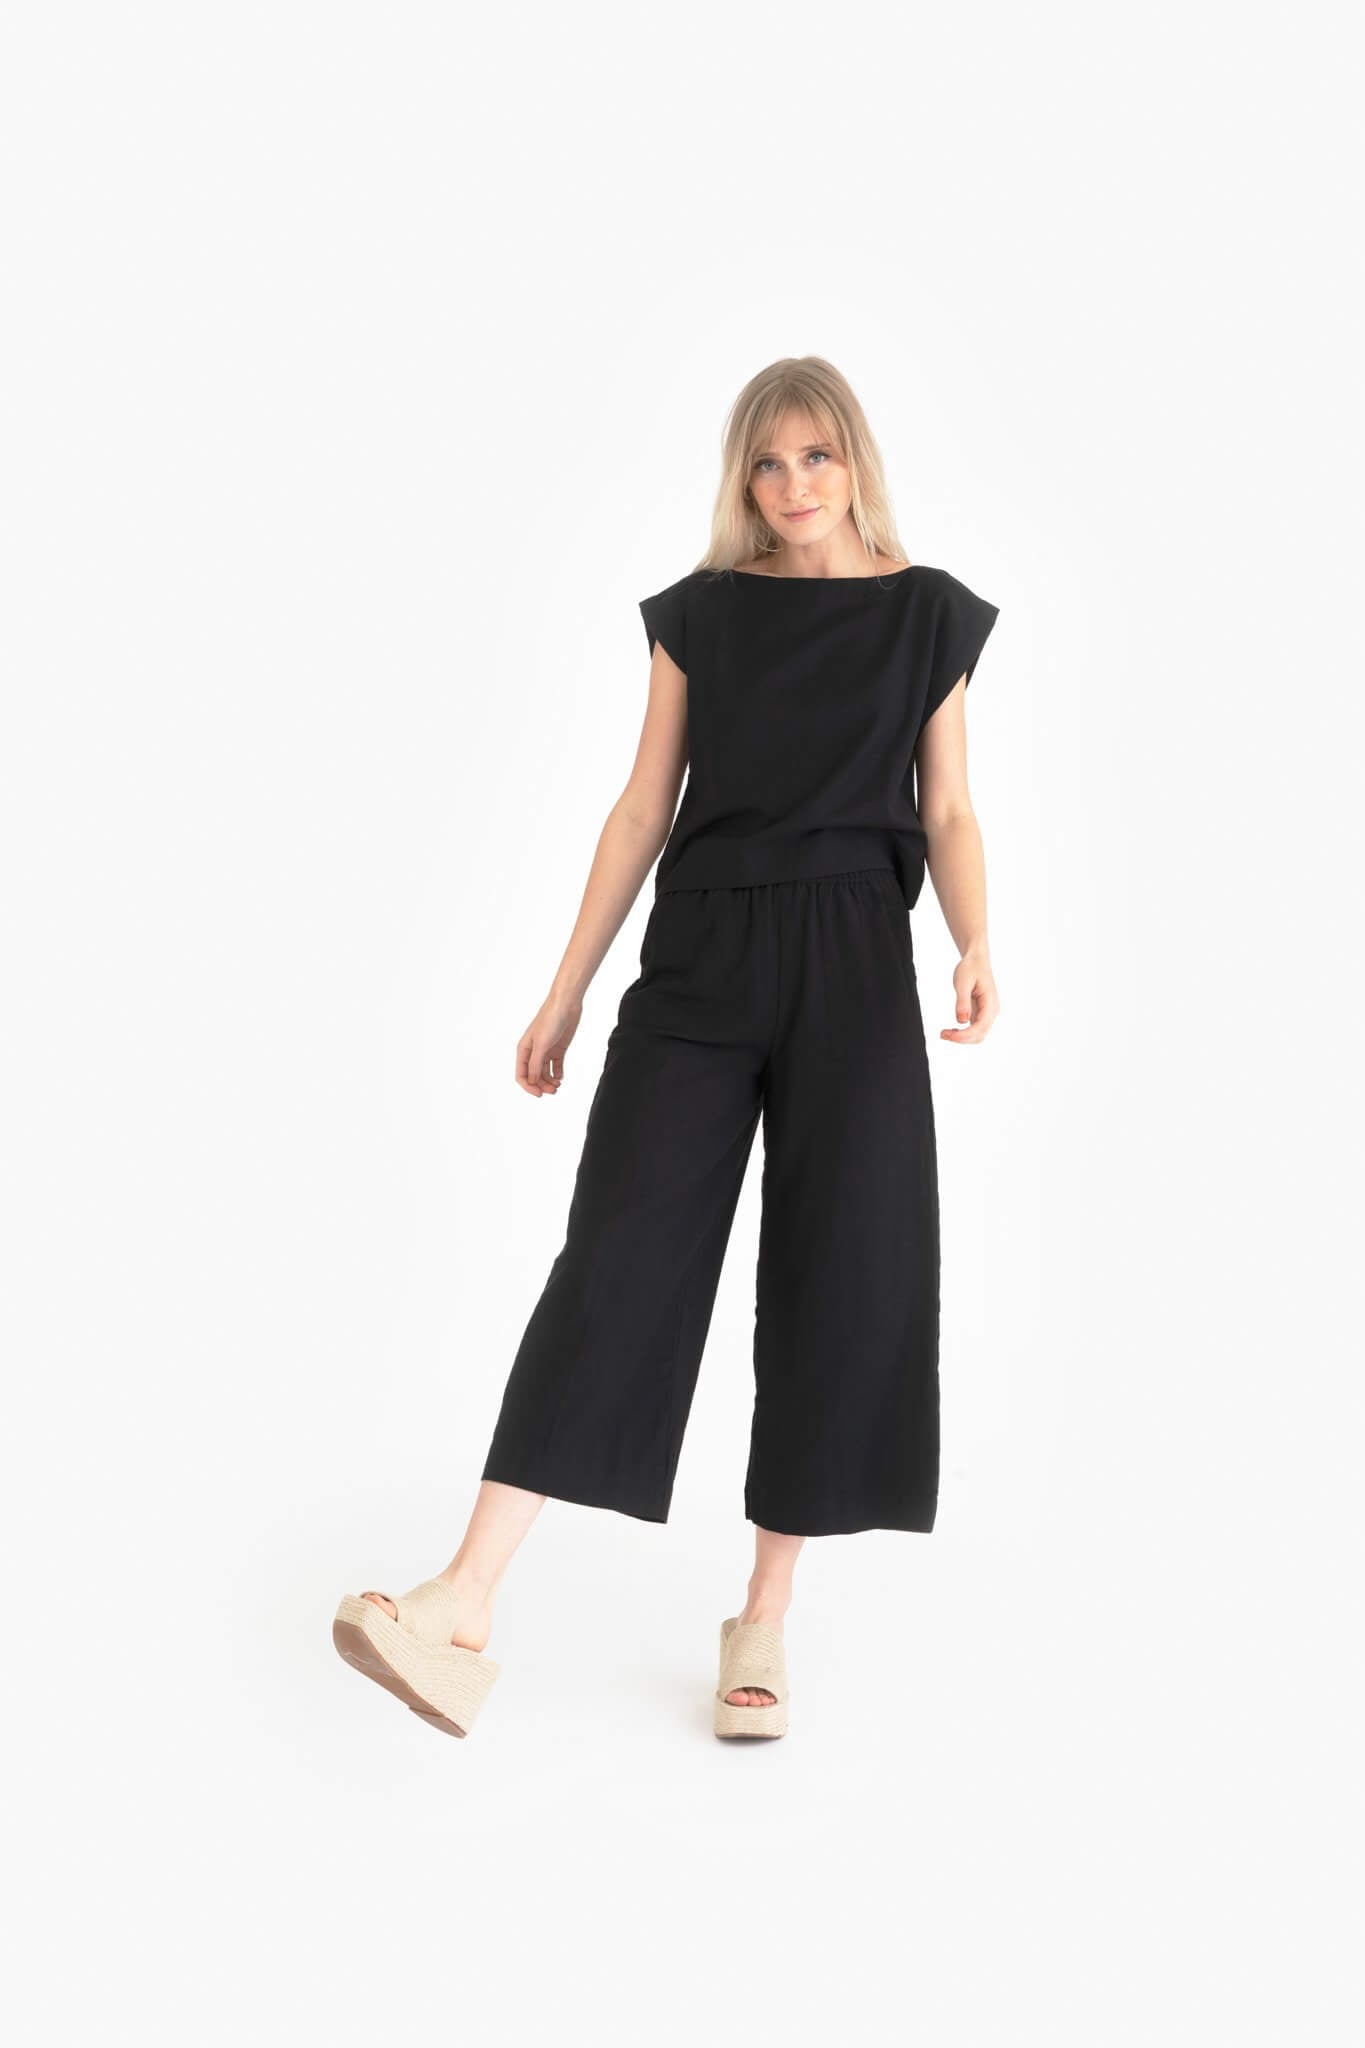 LAUDE The Label Everyday Crop Pant in Black